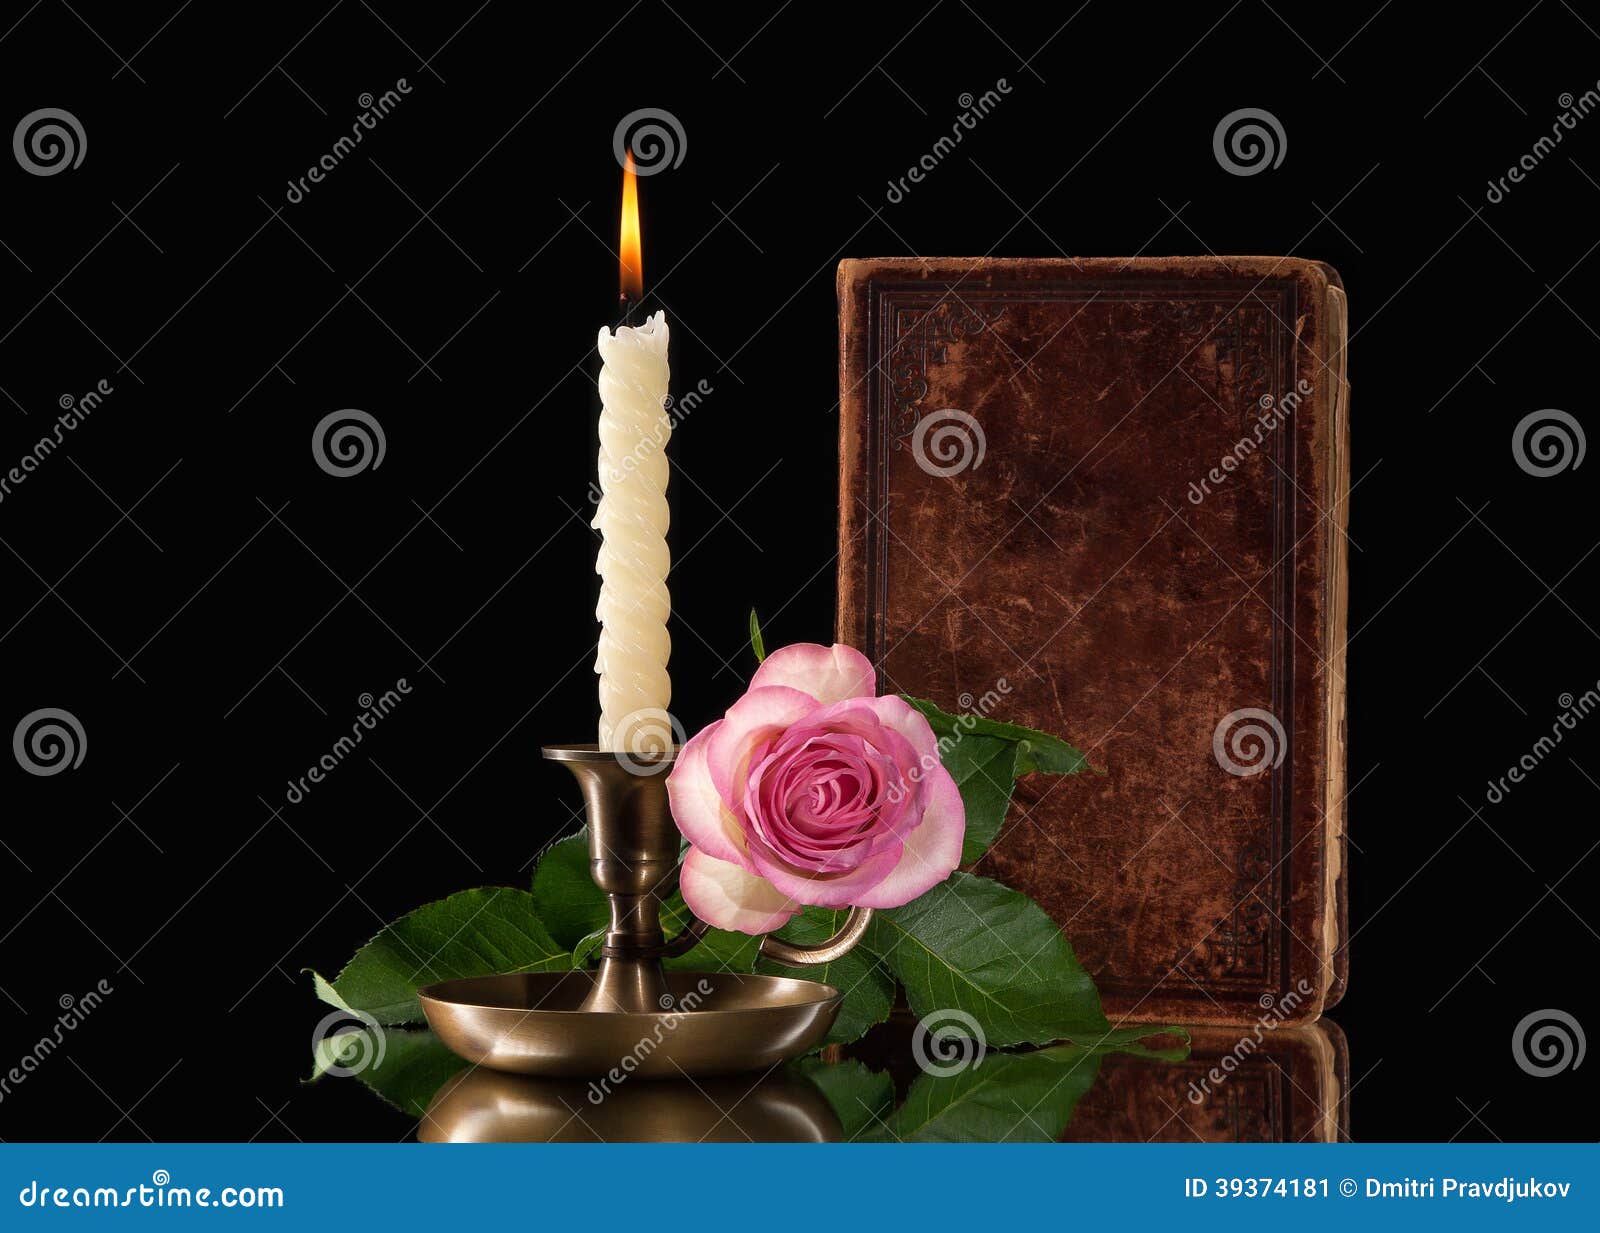 Candle Light with Flower on Black Background Stock Image - Image of